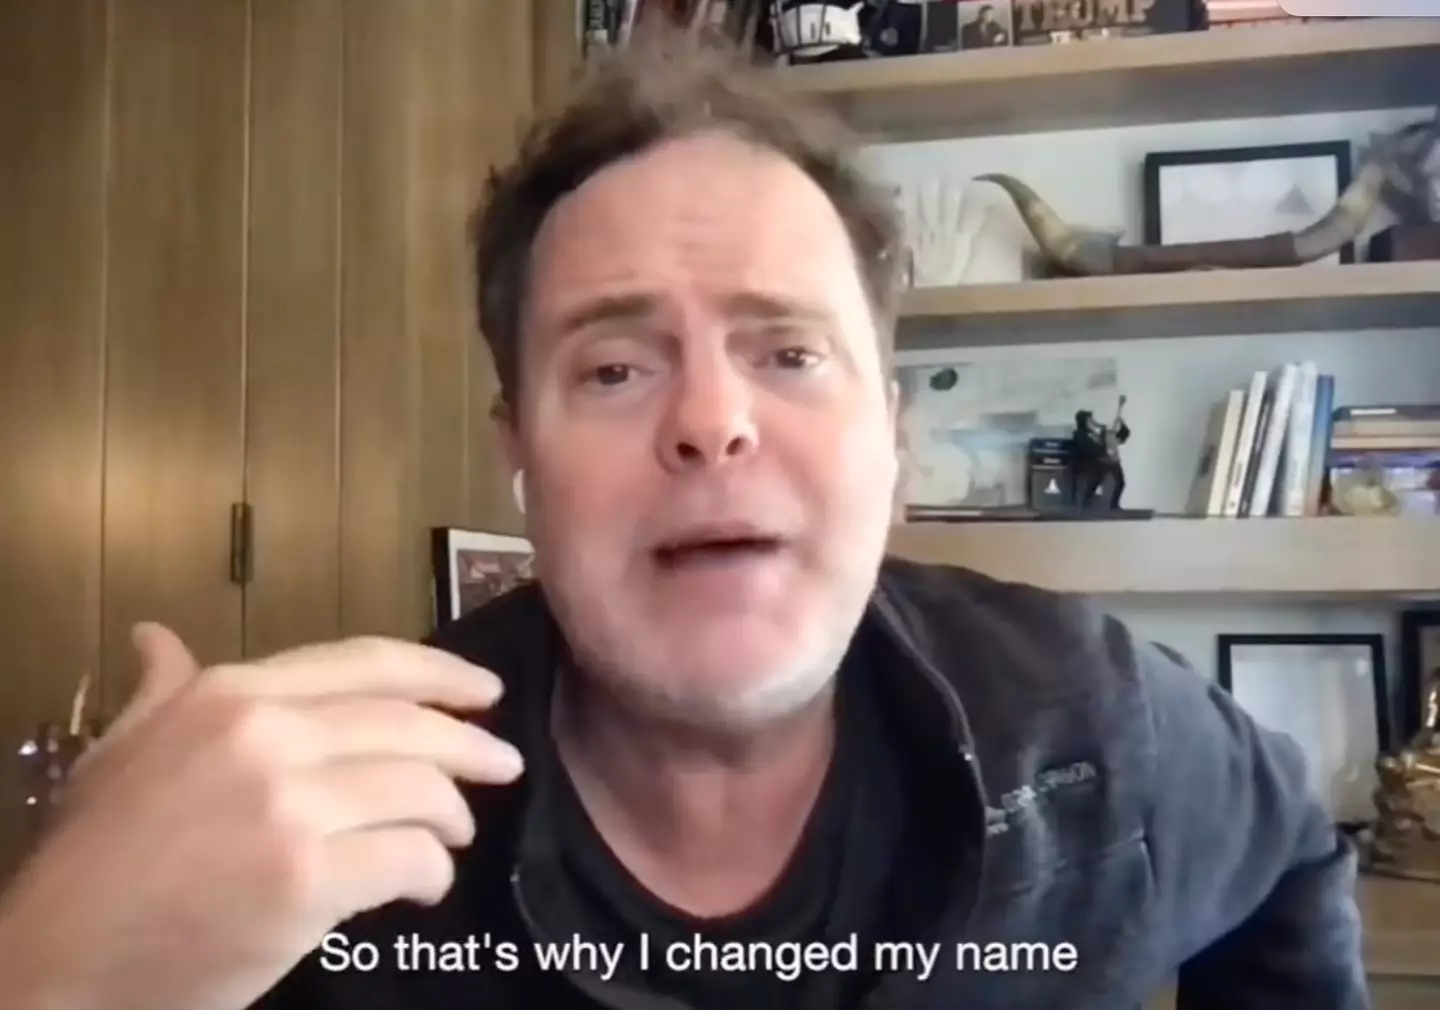 Rainn Wilson has changed his name to raise awareness about climate change.